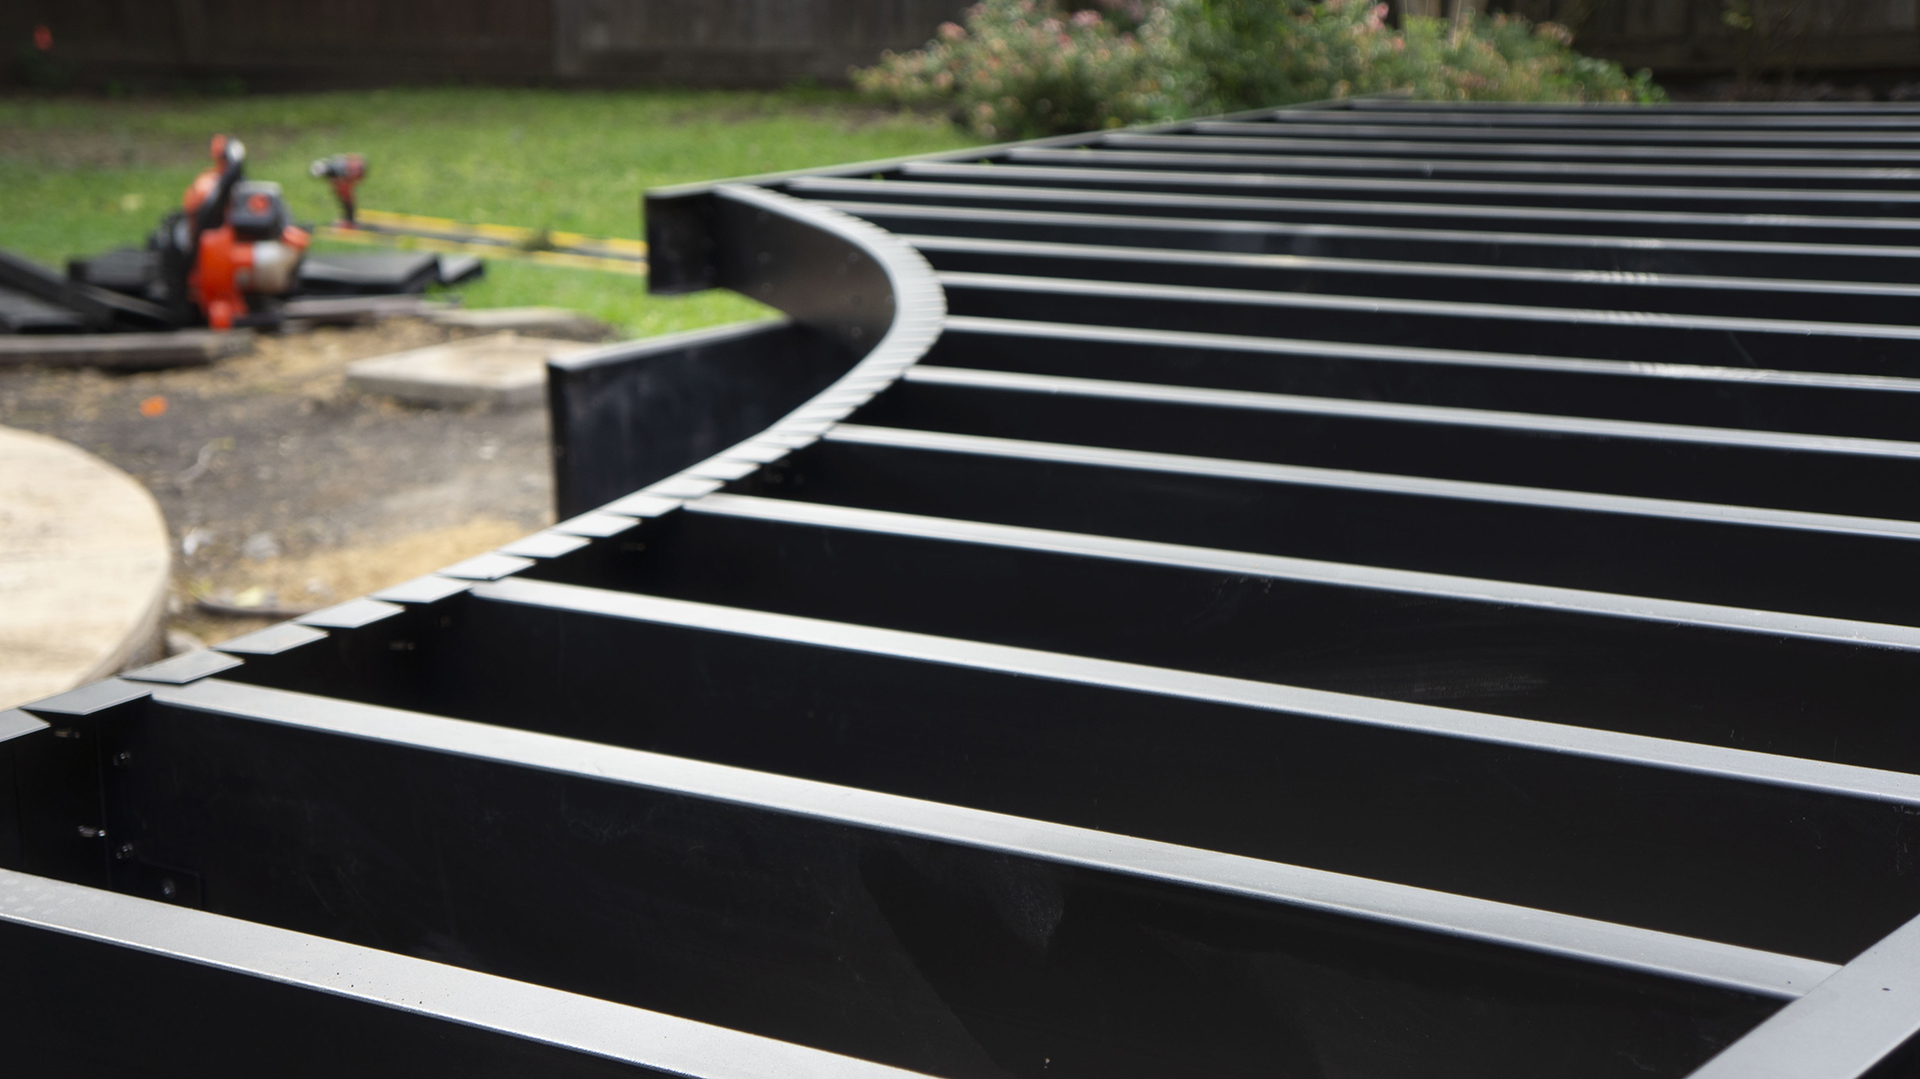 Curved steel deck framing with evenly spaced joists in a backyard setting.